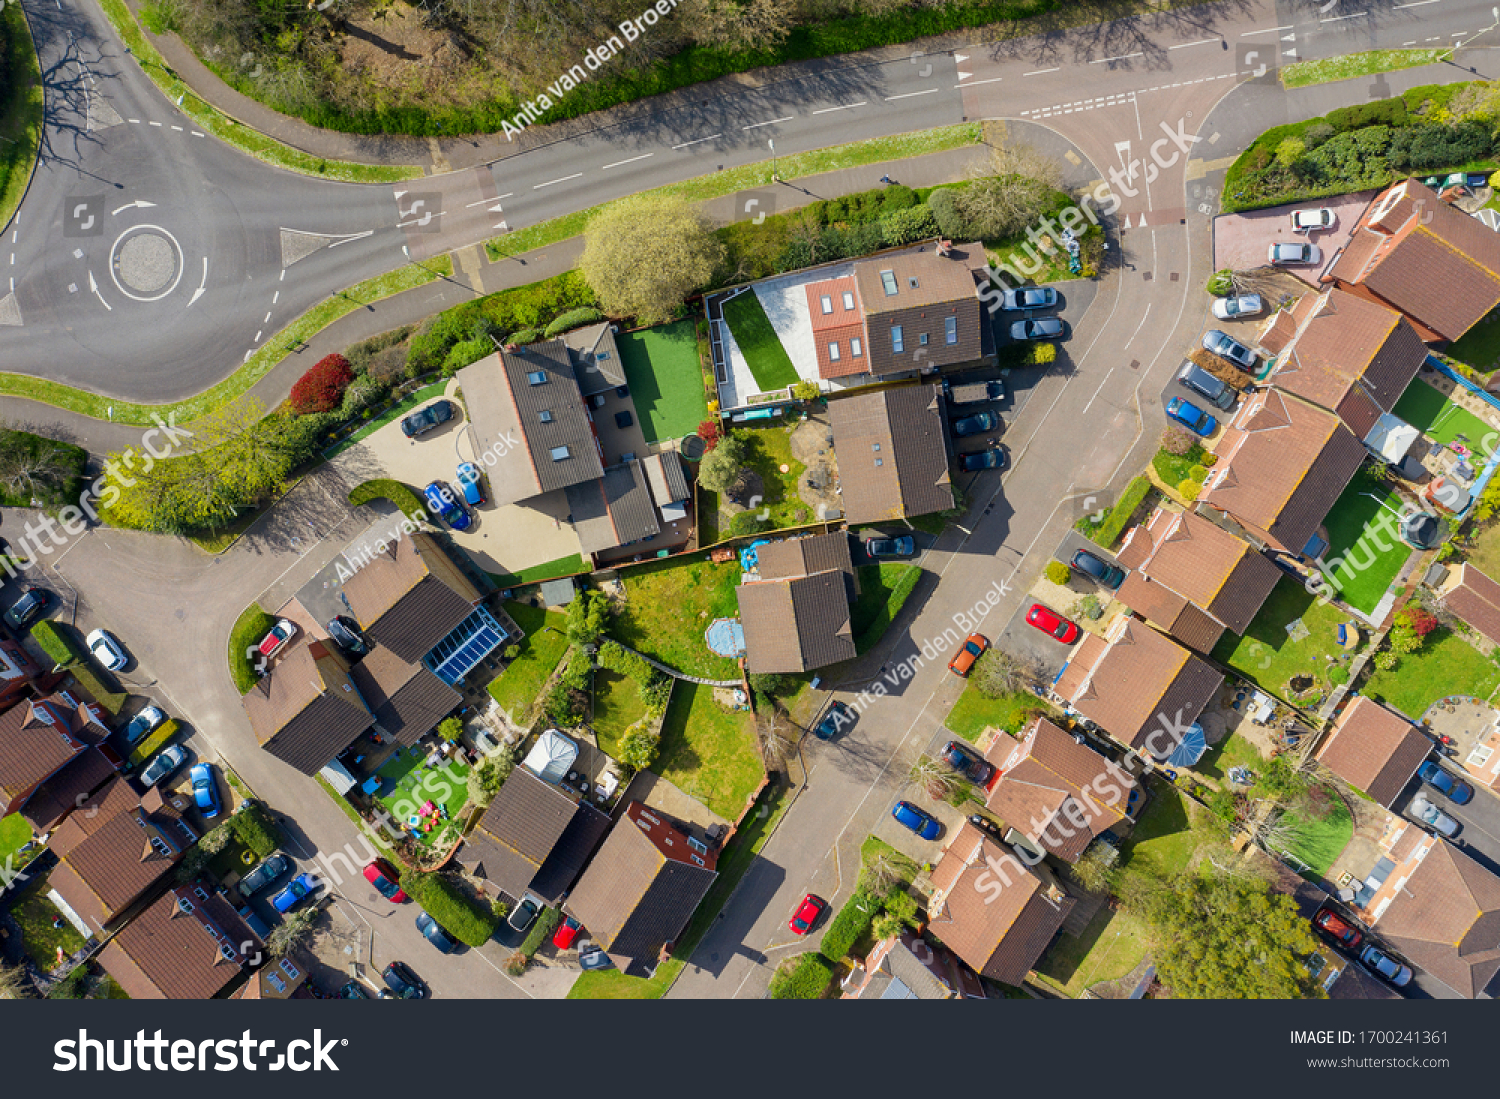 Houses on a housing estate in Hampshire, United Kingdom with deserted streets during lockdown quarantine for Coranavirus Covid 19. All cars are parked and no cars are moving. On a sunny day #1700241361